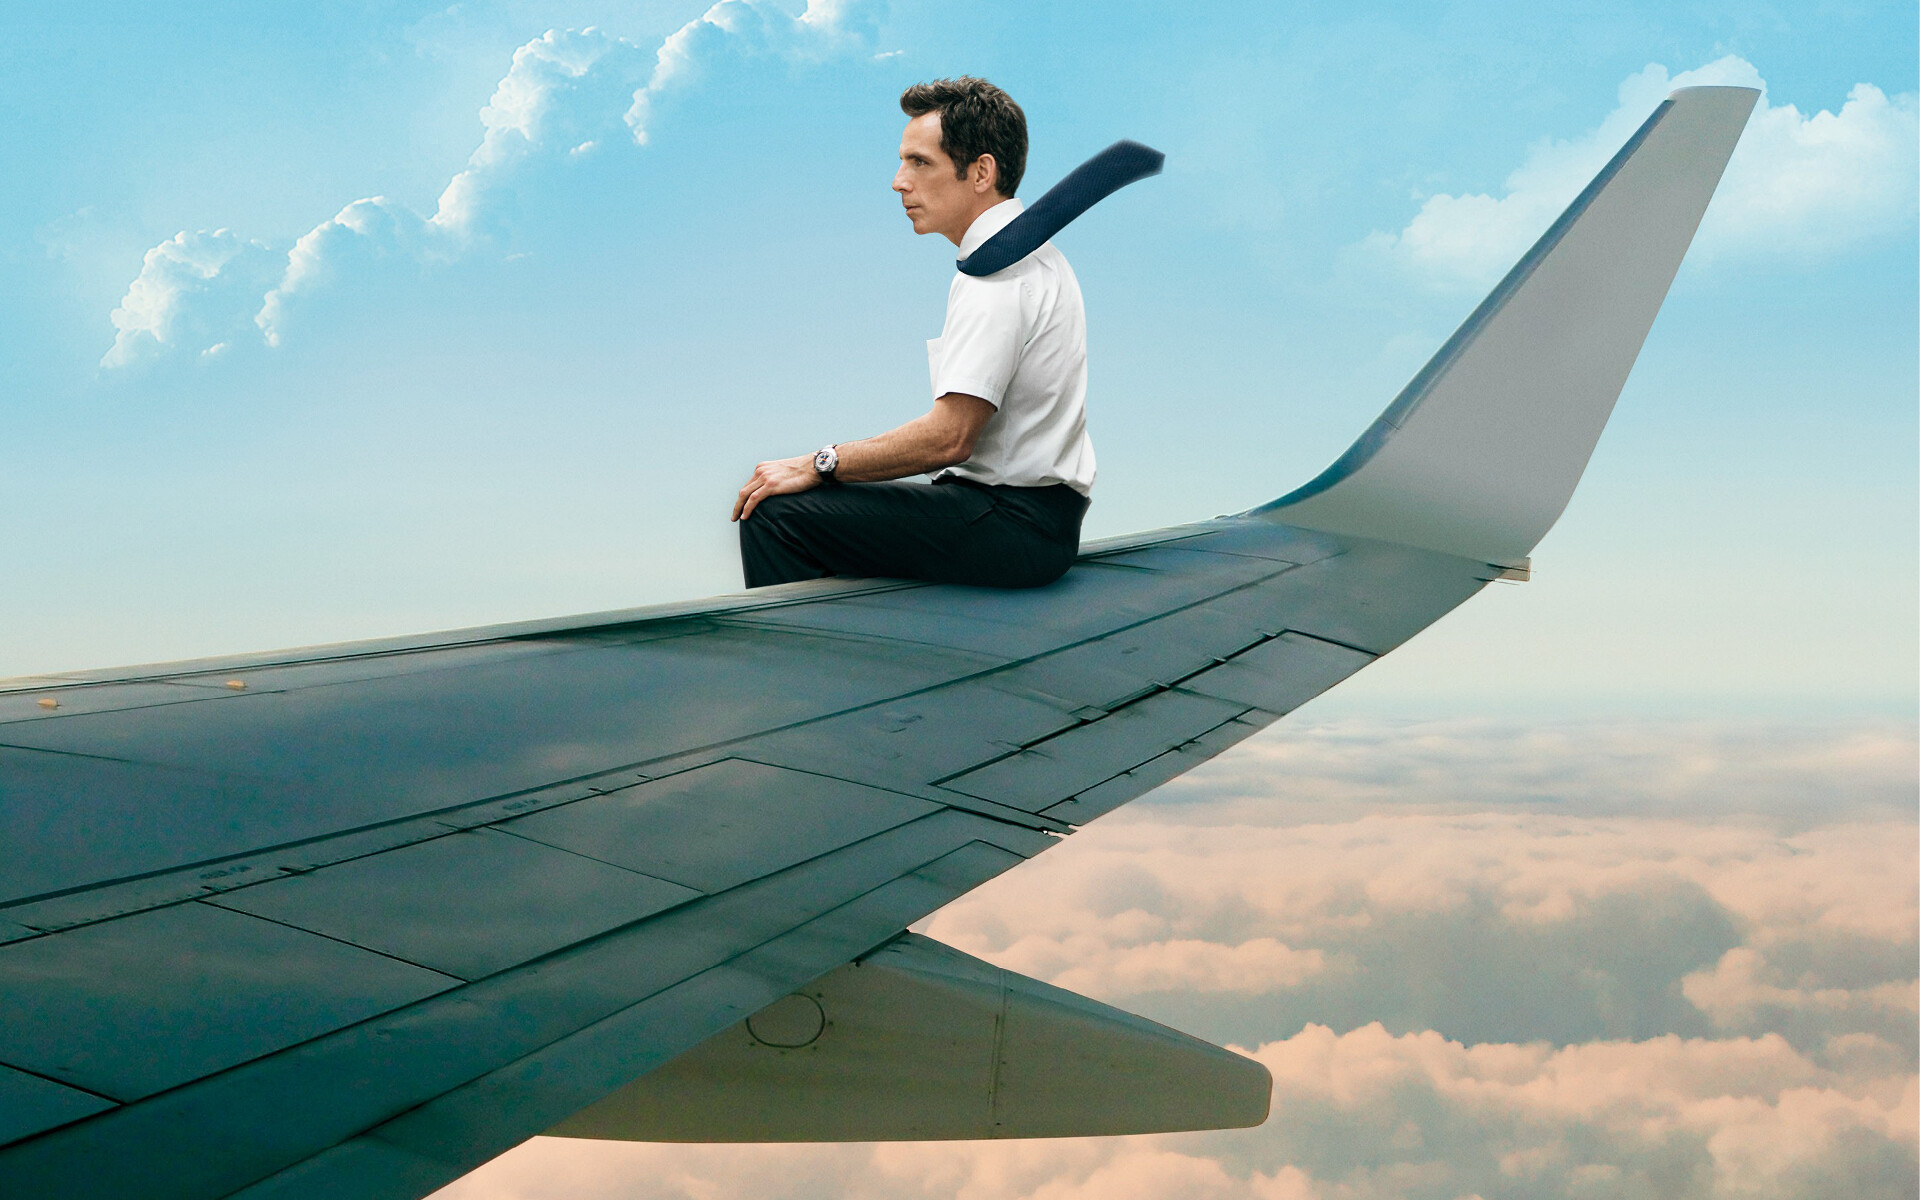 The Secret Life of Walter Mitty: A film by Stiller, 2013, Fantasy, Comedy. 1920x1200 HD Wallpaper.